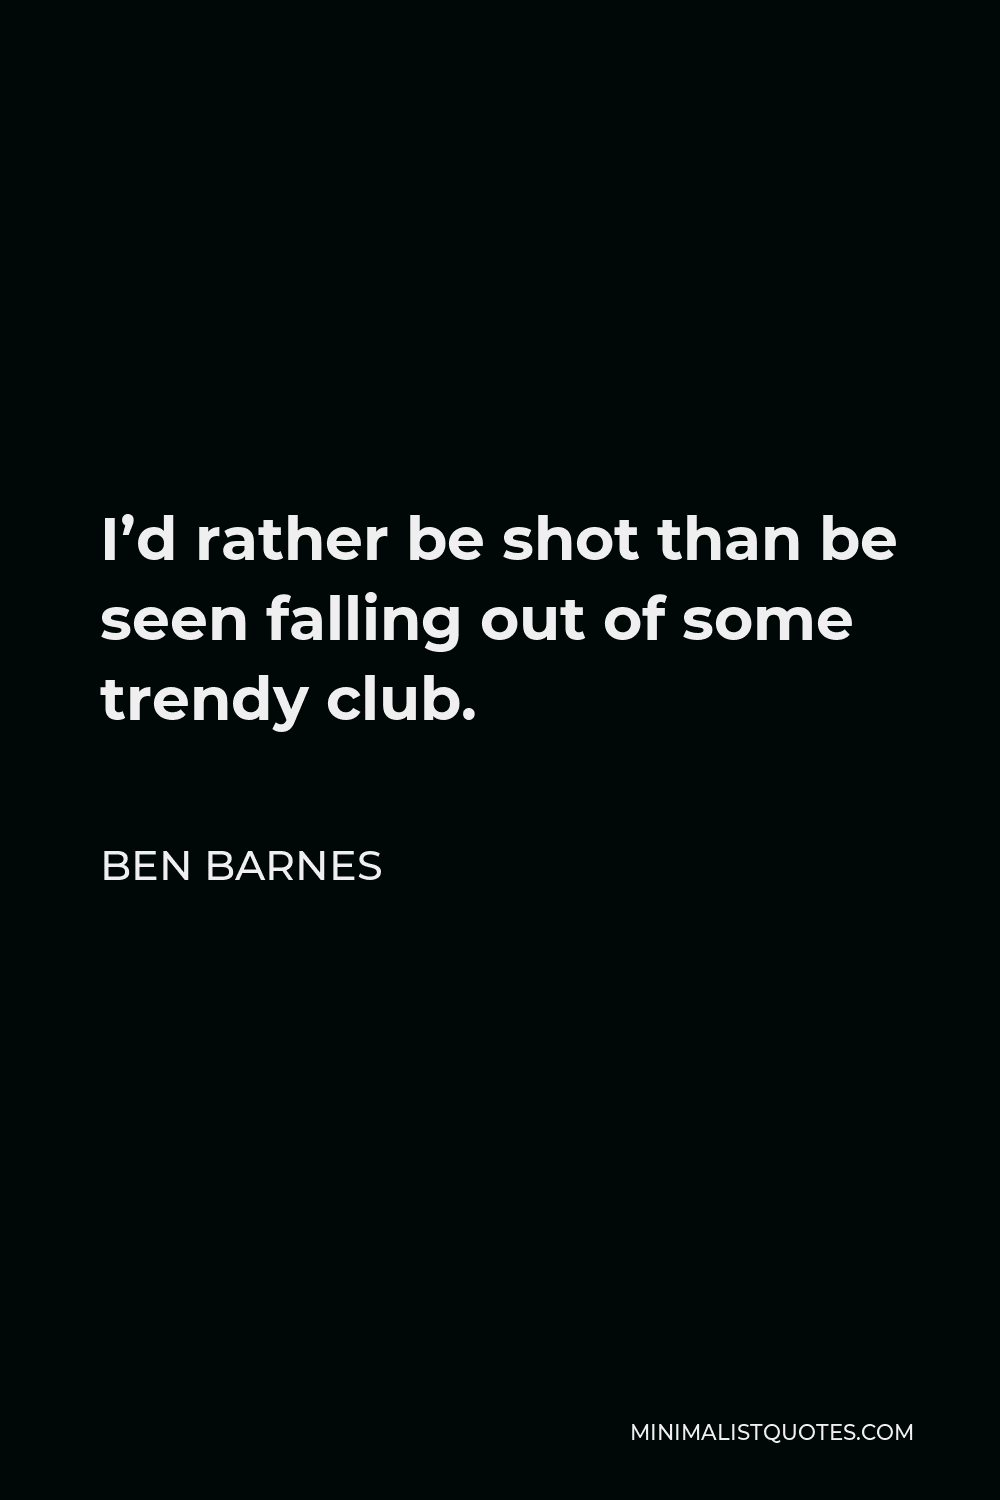 Ben Barnes Quote - I’d rather be shot than be seen falling out of some trendy club.